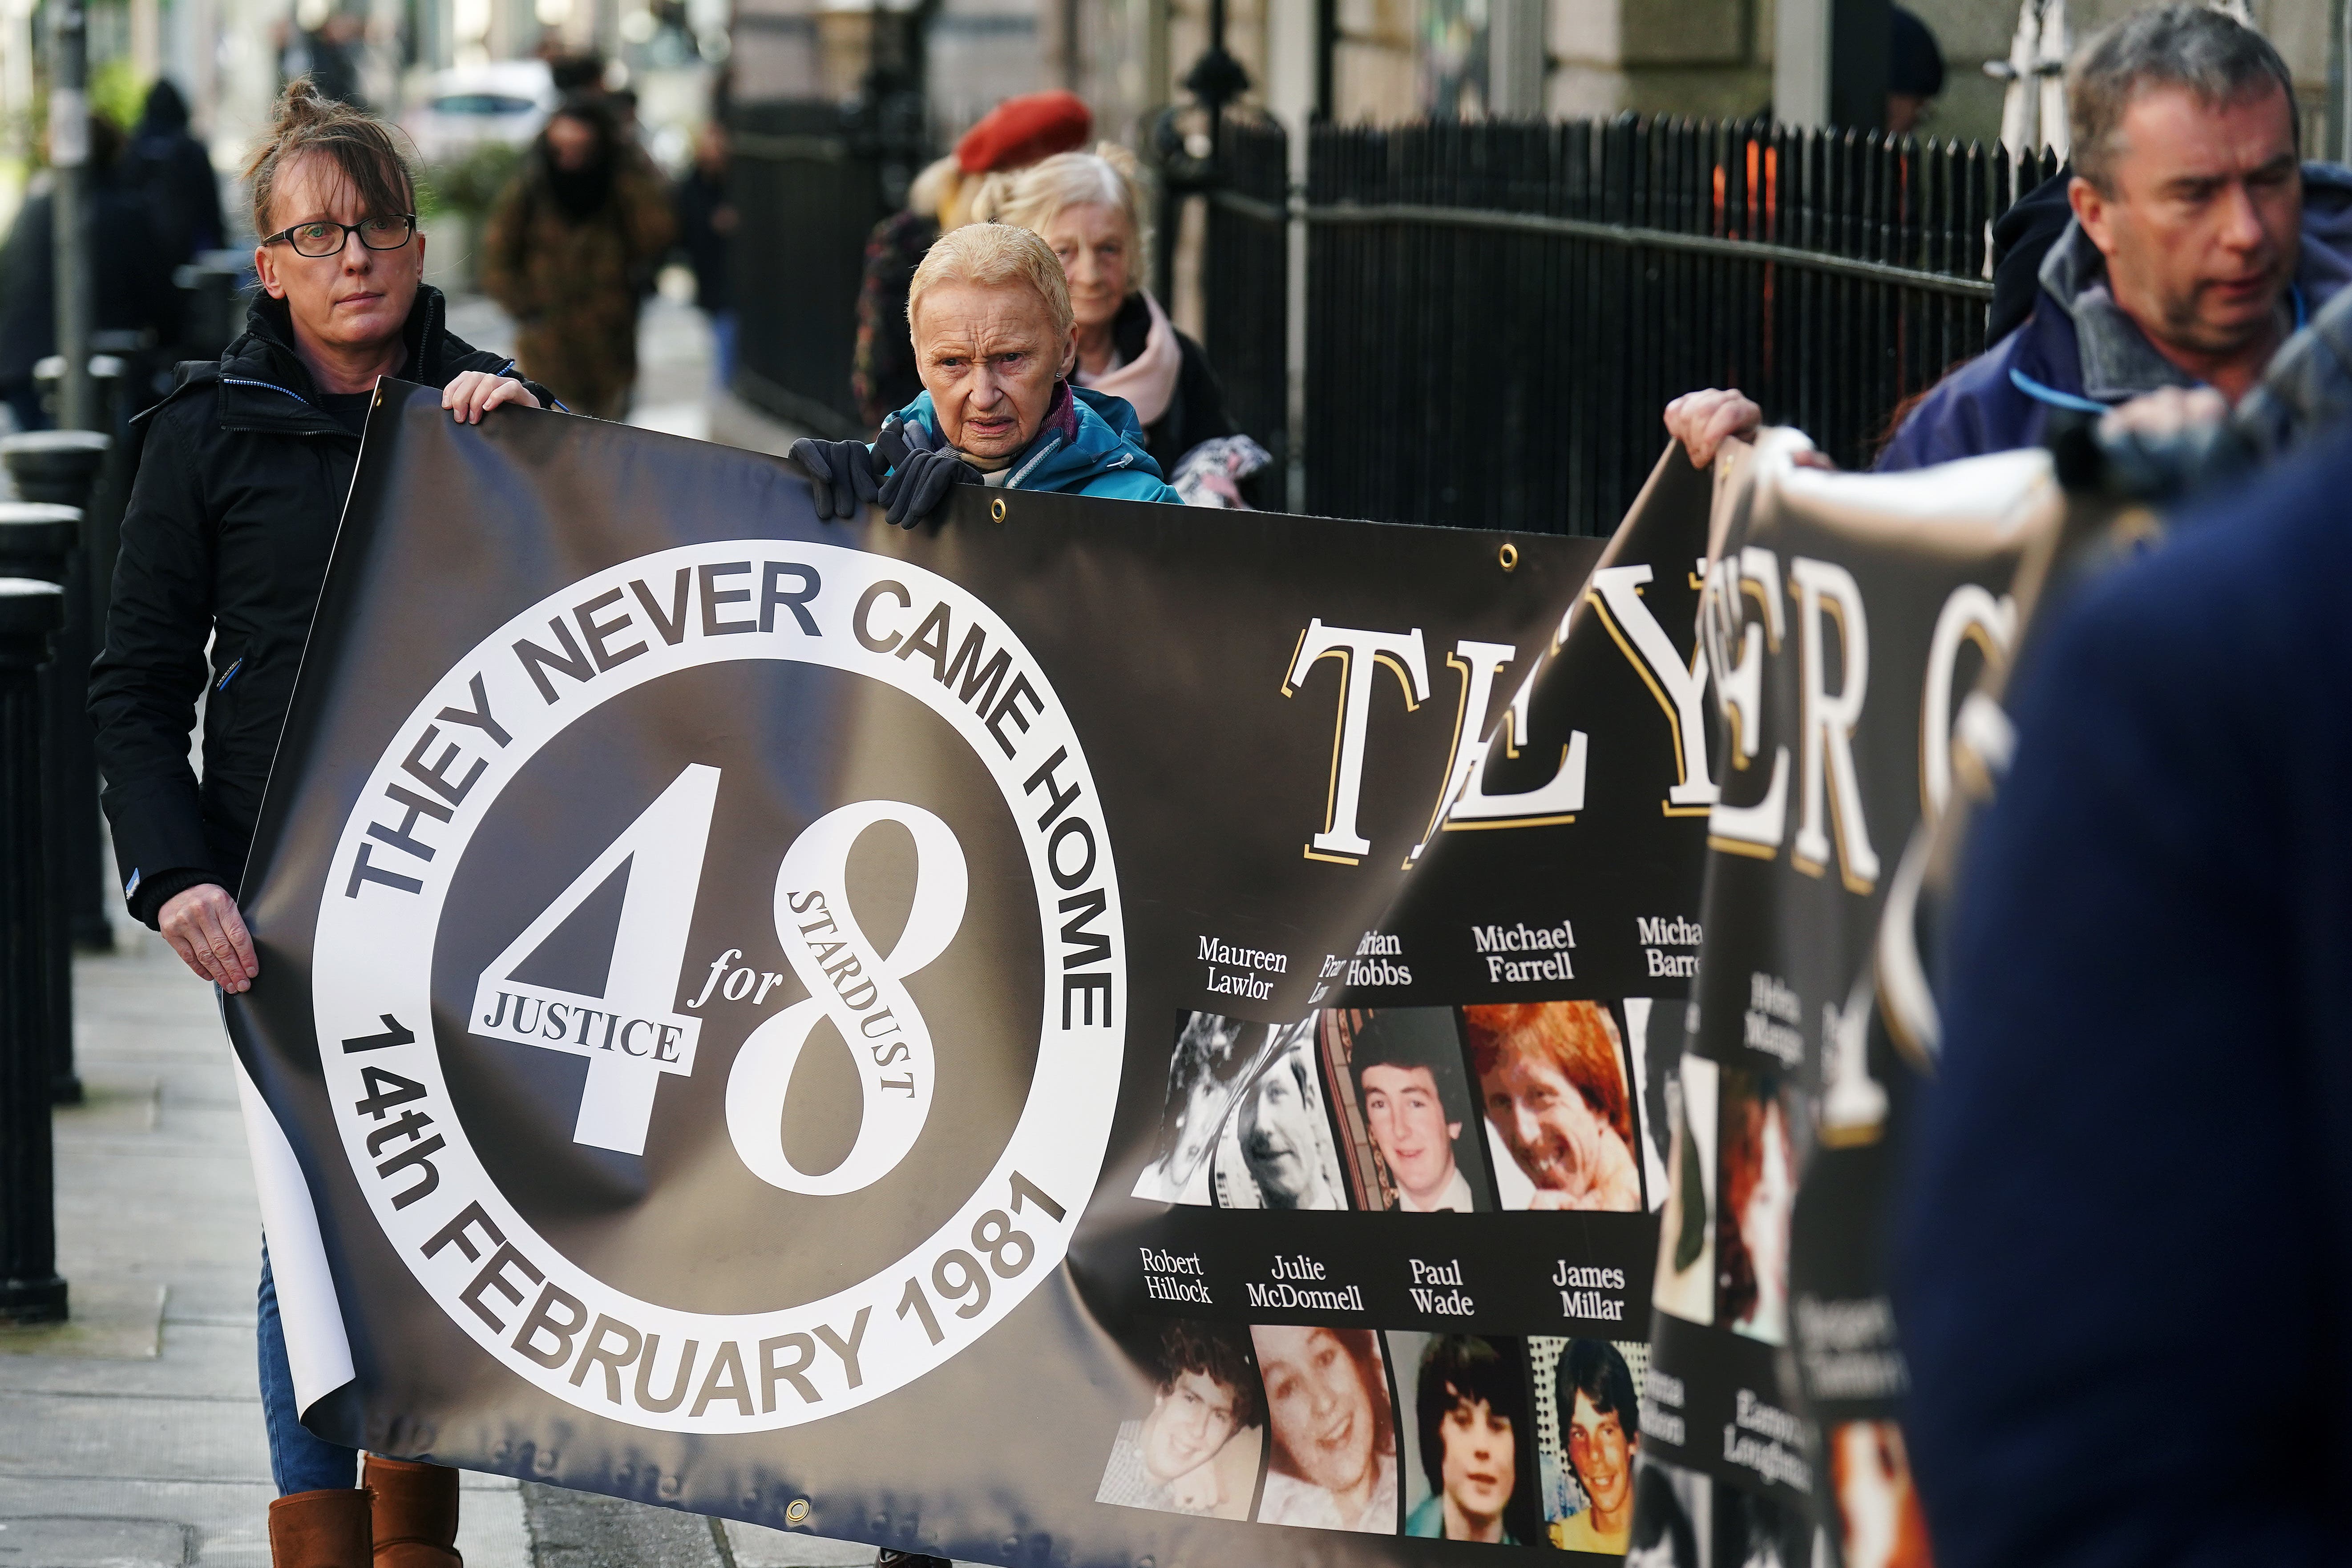 Family members of victims had campaigned since 2009 for a fresh inquest